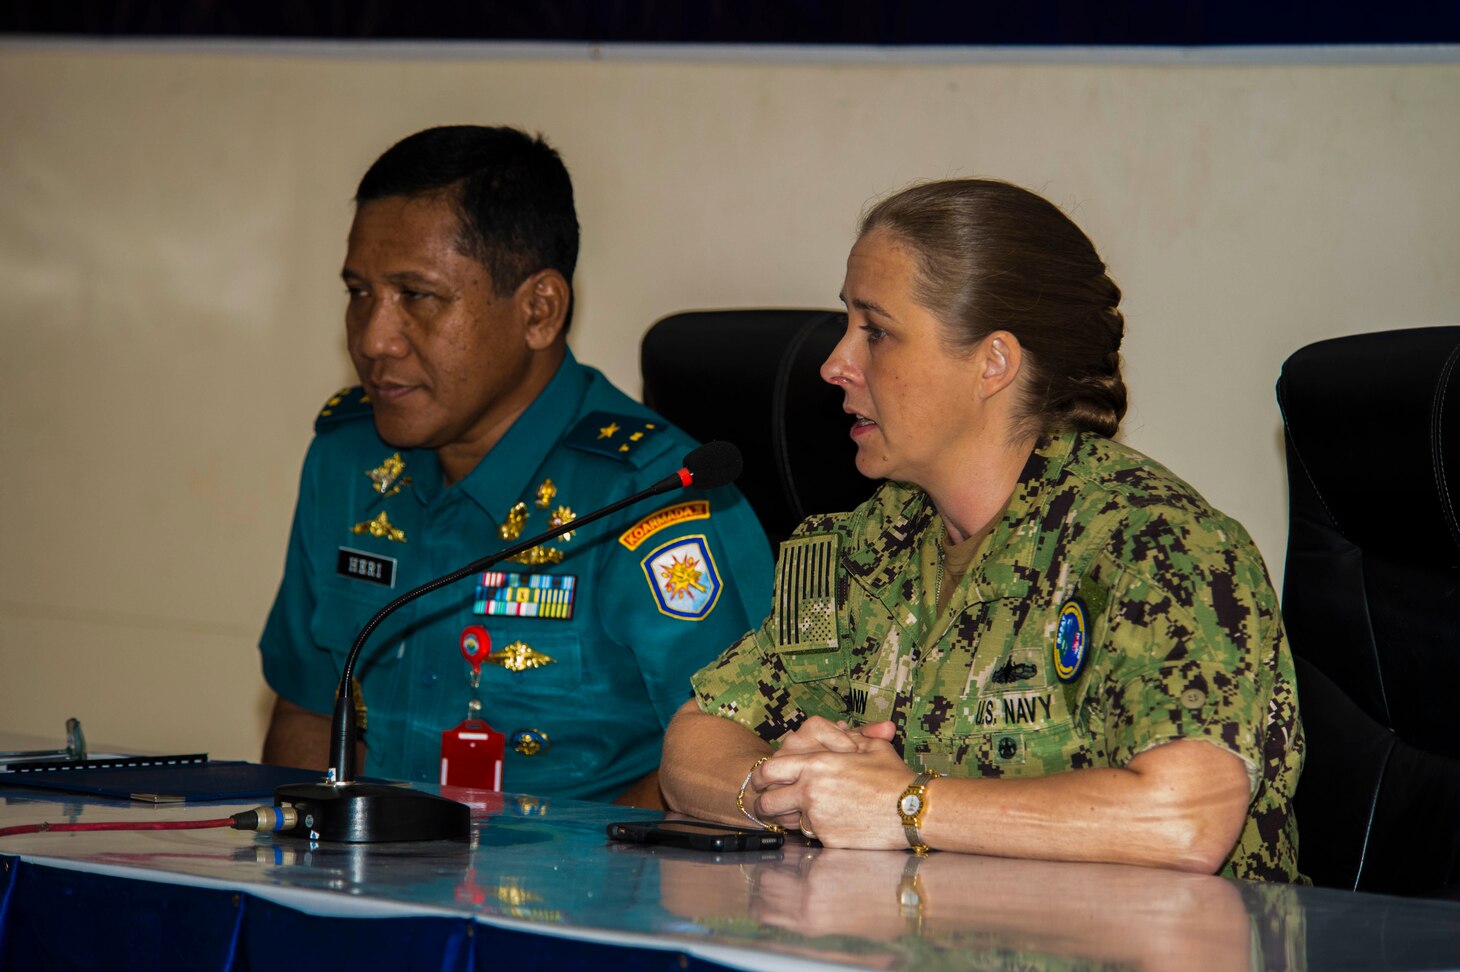 JAVA SEA (August 7, 2019) U.S. Navy Capt. Ann McCann, deputy commodore of Commander, Destroyer Squadron 7, and Indonesian Navy First Adm. Ahmadi Heri Purwono, chief of staff, 2nd Fleet Command provide their closing remarks during the closing ceremony of Cooperation Afloat Readiness and Training (CARAT) Indonesia 2019. CARAT, the U.S. Navy's longest running regional exercise in South and Southeast Asia, strengthens partnerships between regional navies and enhances maritime security cooperation throughout the Indo-Pacific.